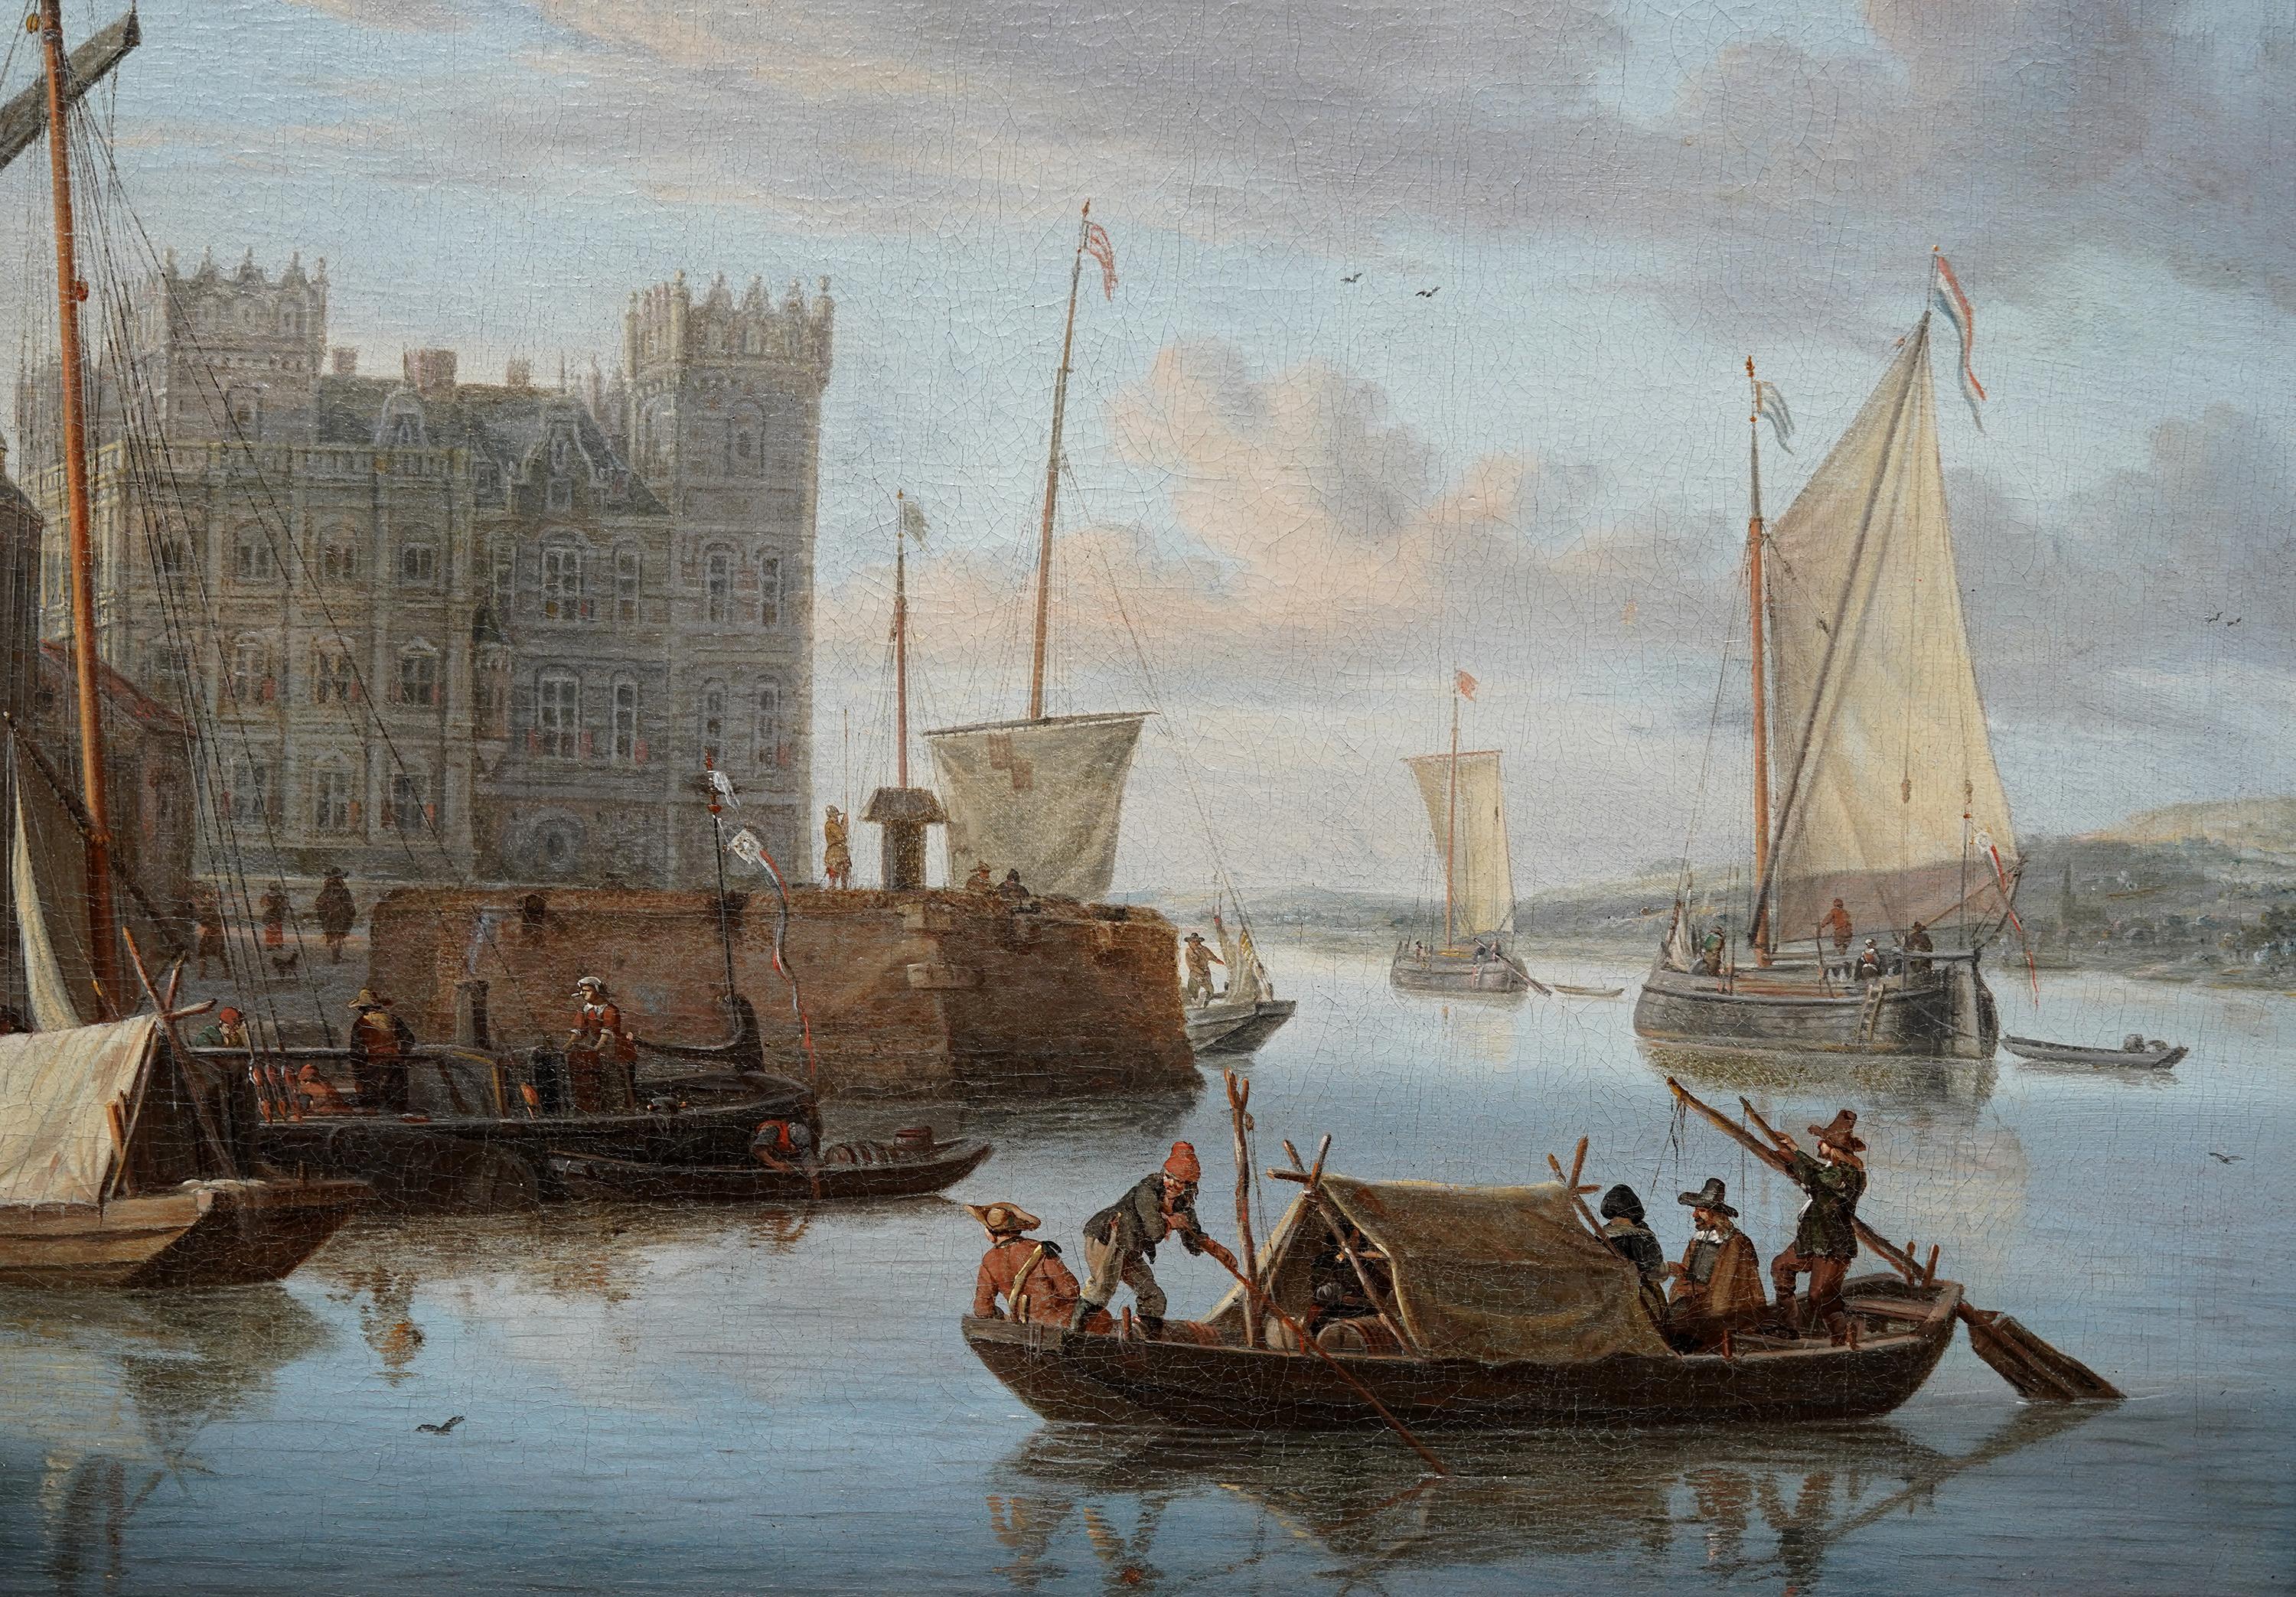 This superb Dutch 17th century Golden Age Old Master cityscape oil painting of Amsterdam is by noted artist Jacobus Storck. Painted circa 1670, the composition is a Dutch Amsterdam harbour scene with boats and figures in the foreground, a crane and